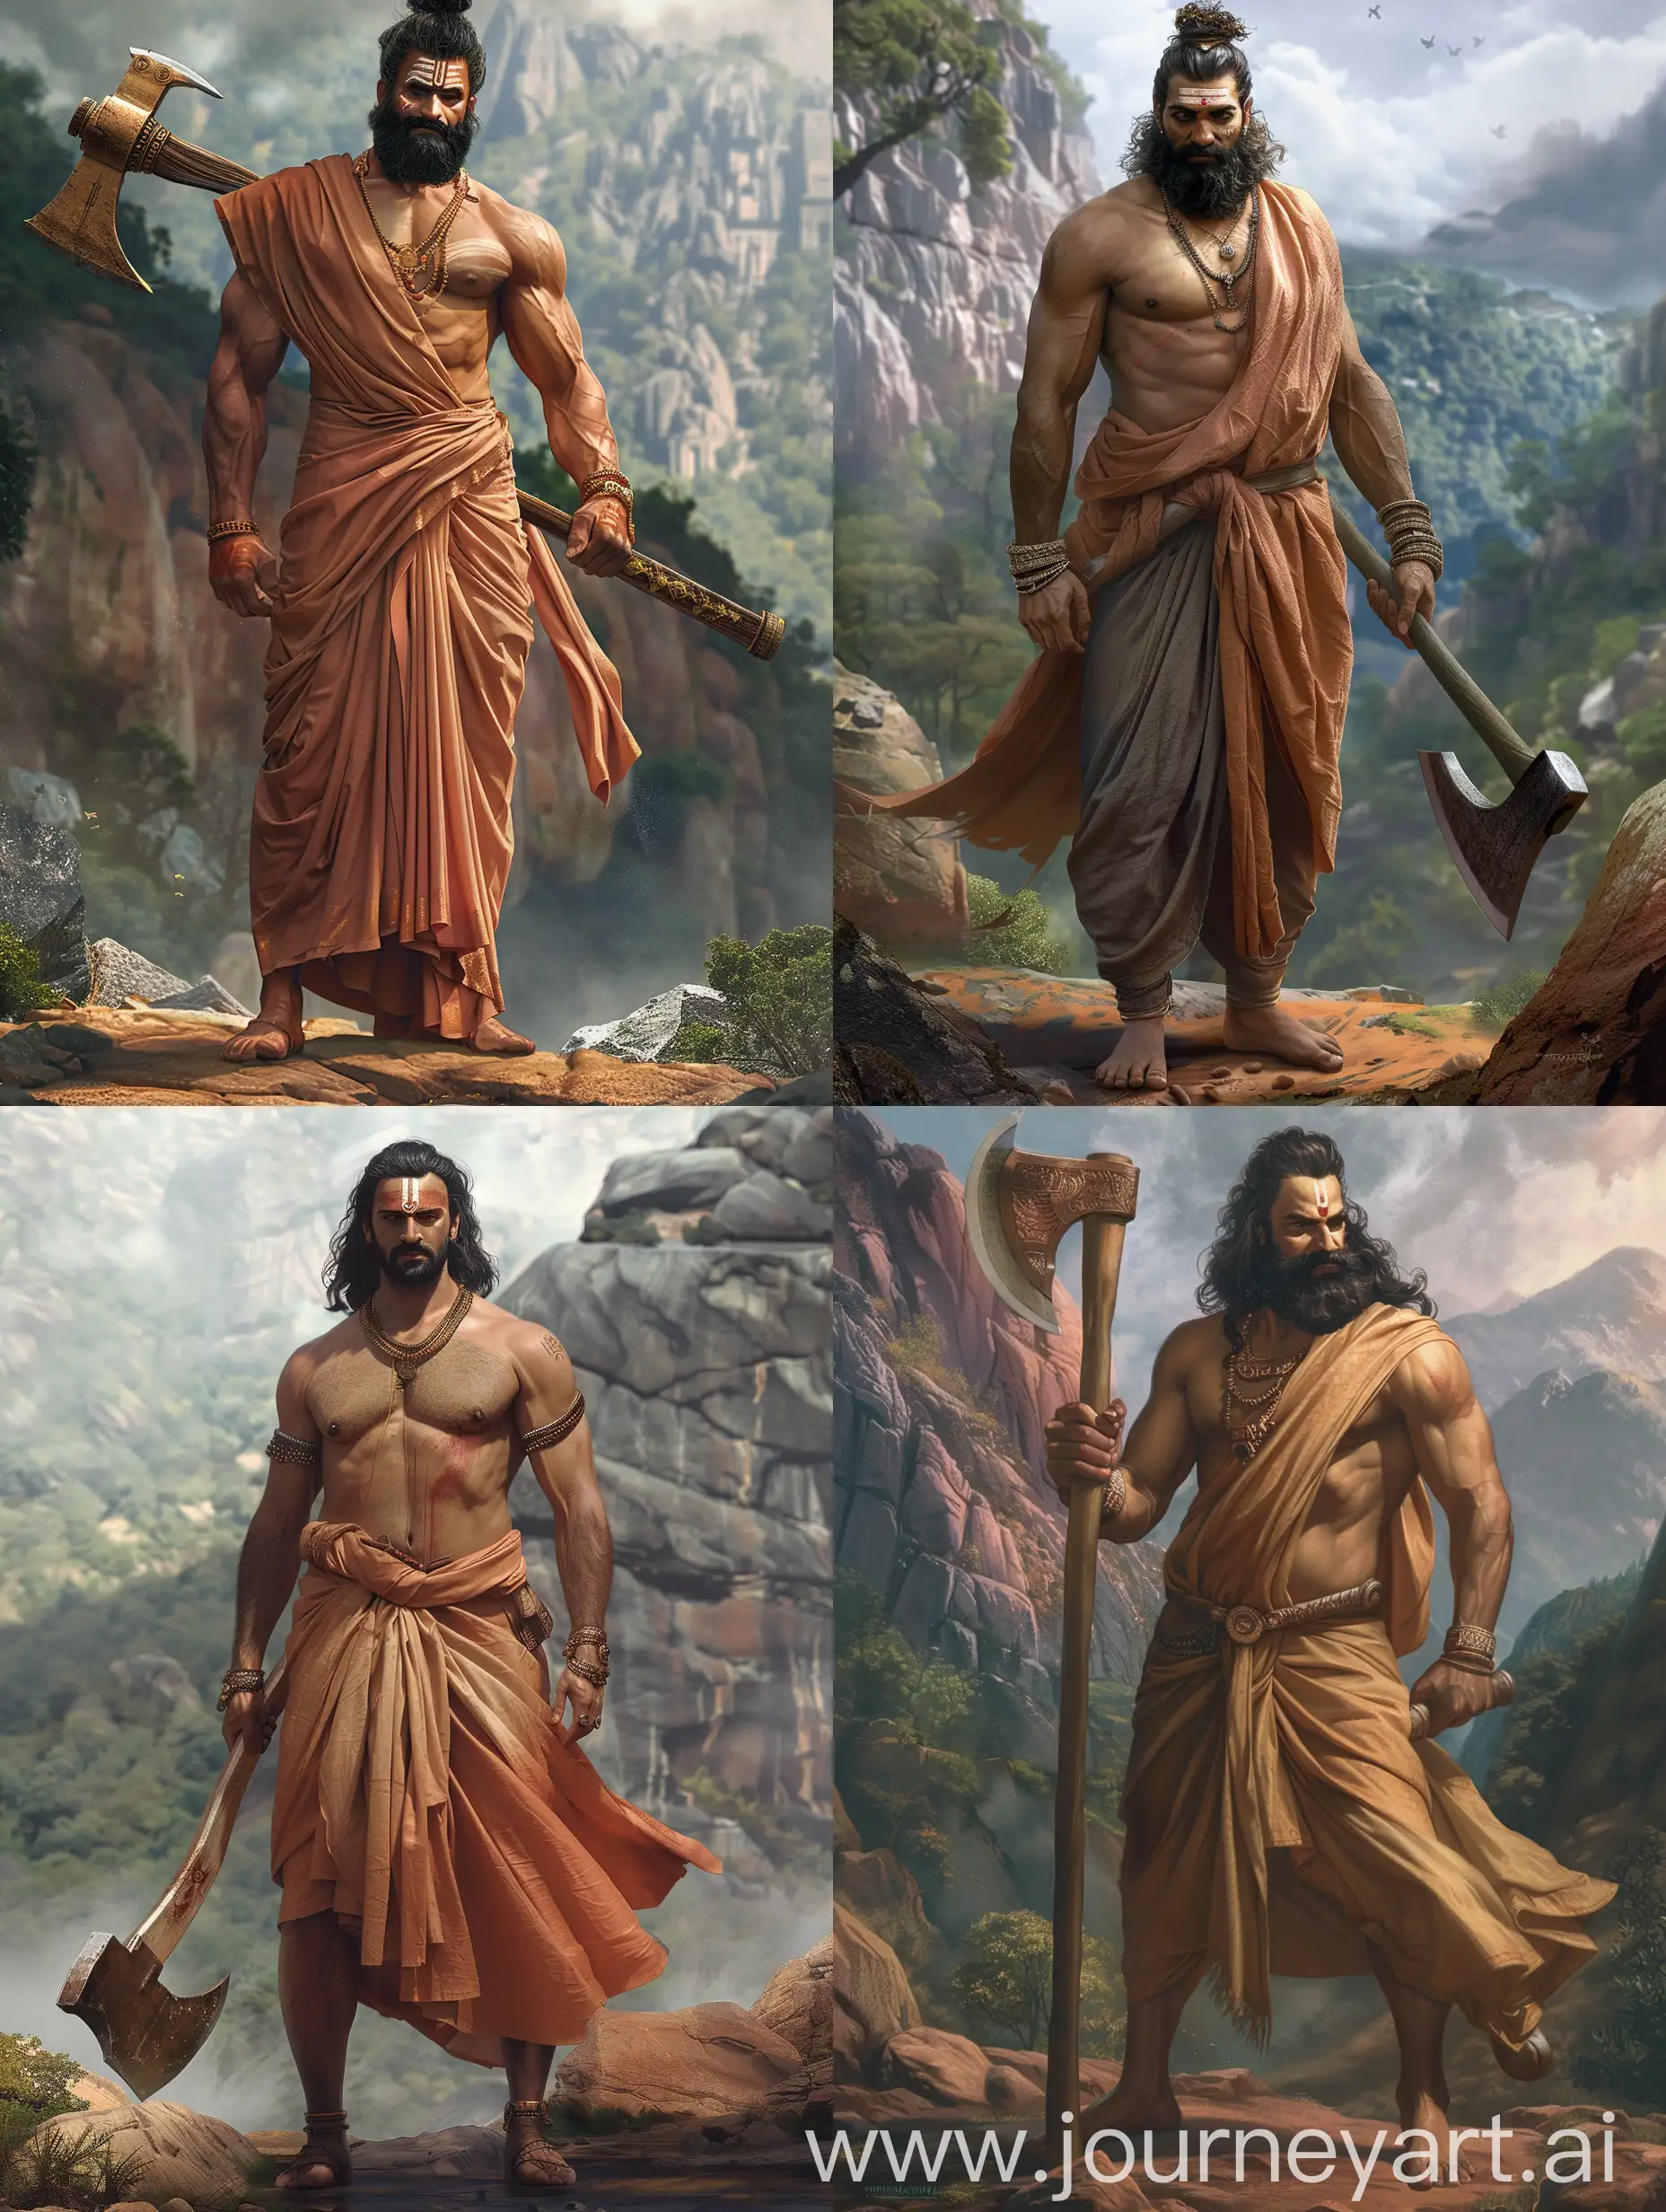 Visualize Lord Parashurama, the fierce warrior sage, standing tall and resolute. His muscular frame is adorned in simple, earth-toned robes that flow with the breeze. In his hand, he wields his mighty axe, its blade gleaming with an aura of divine power. His eyes, filled with unwavering determination and wisdom, scan the horizon. Behind him, a backdrop of rugged mountains and dense forests stretches out, symbolizing the challenges he has overcome. This is Lord Parashurama, the relentless force of justice and retribution, ever ready to defend righteousness with his formidable axe. ultradetailed. Photorealistic.--ar 9:16